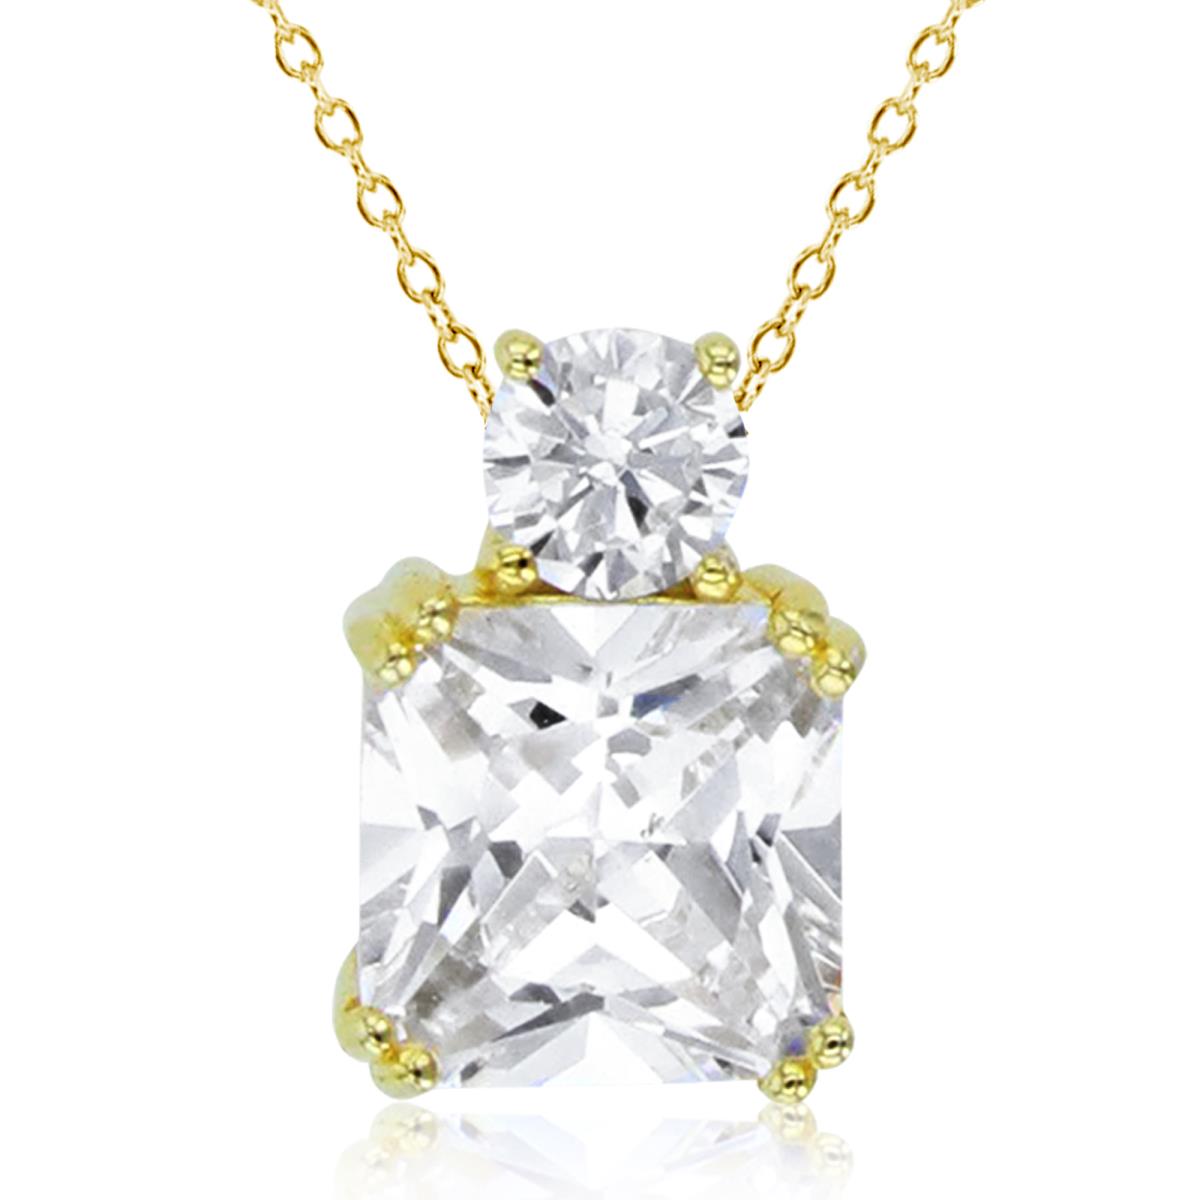 Sterling Silver+1Micron Yellow Gold 8mm Princess & Rnd White CZ 2-Stone 18"Necklace